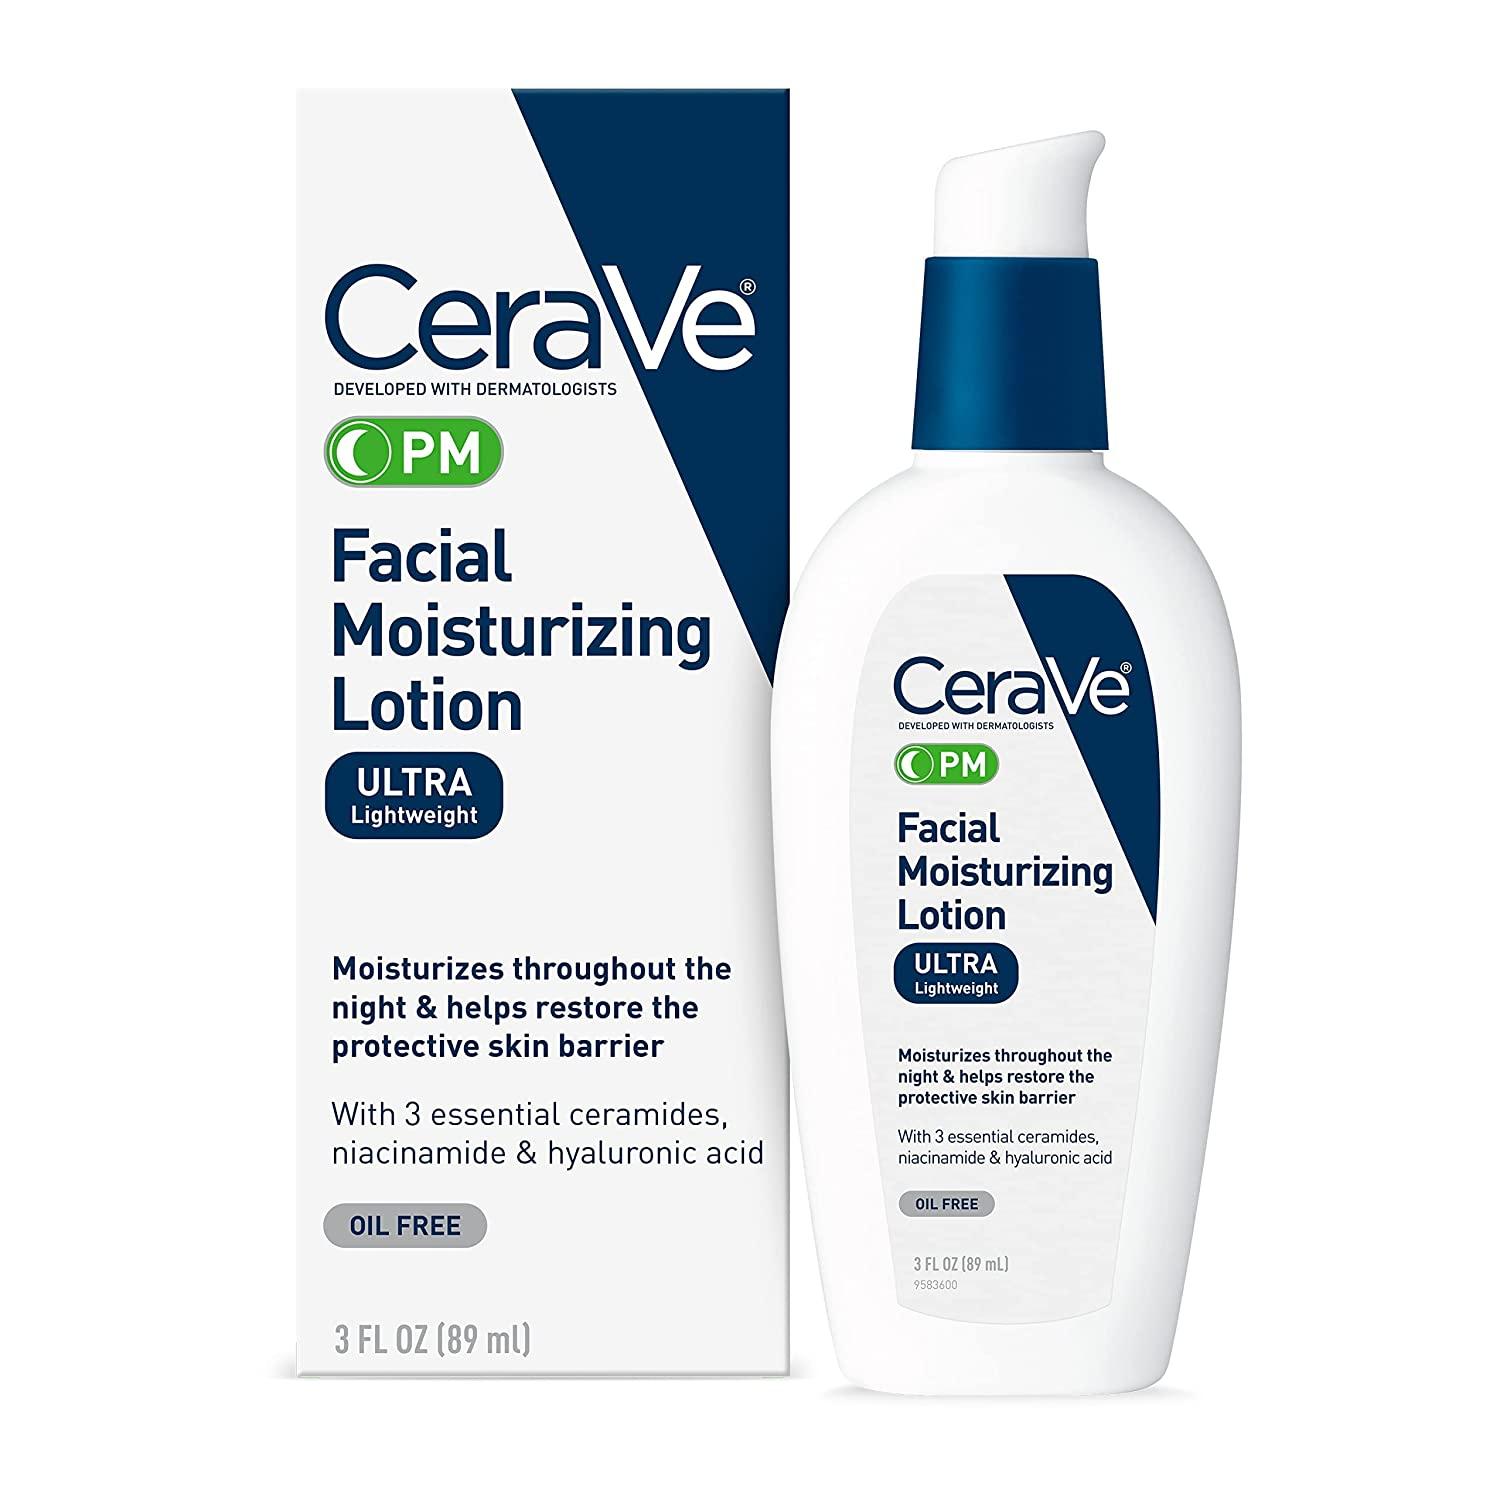 CeraVe PM Ultra Lightweight Facial Moisturizer Lotion for $11.01 Shipped